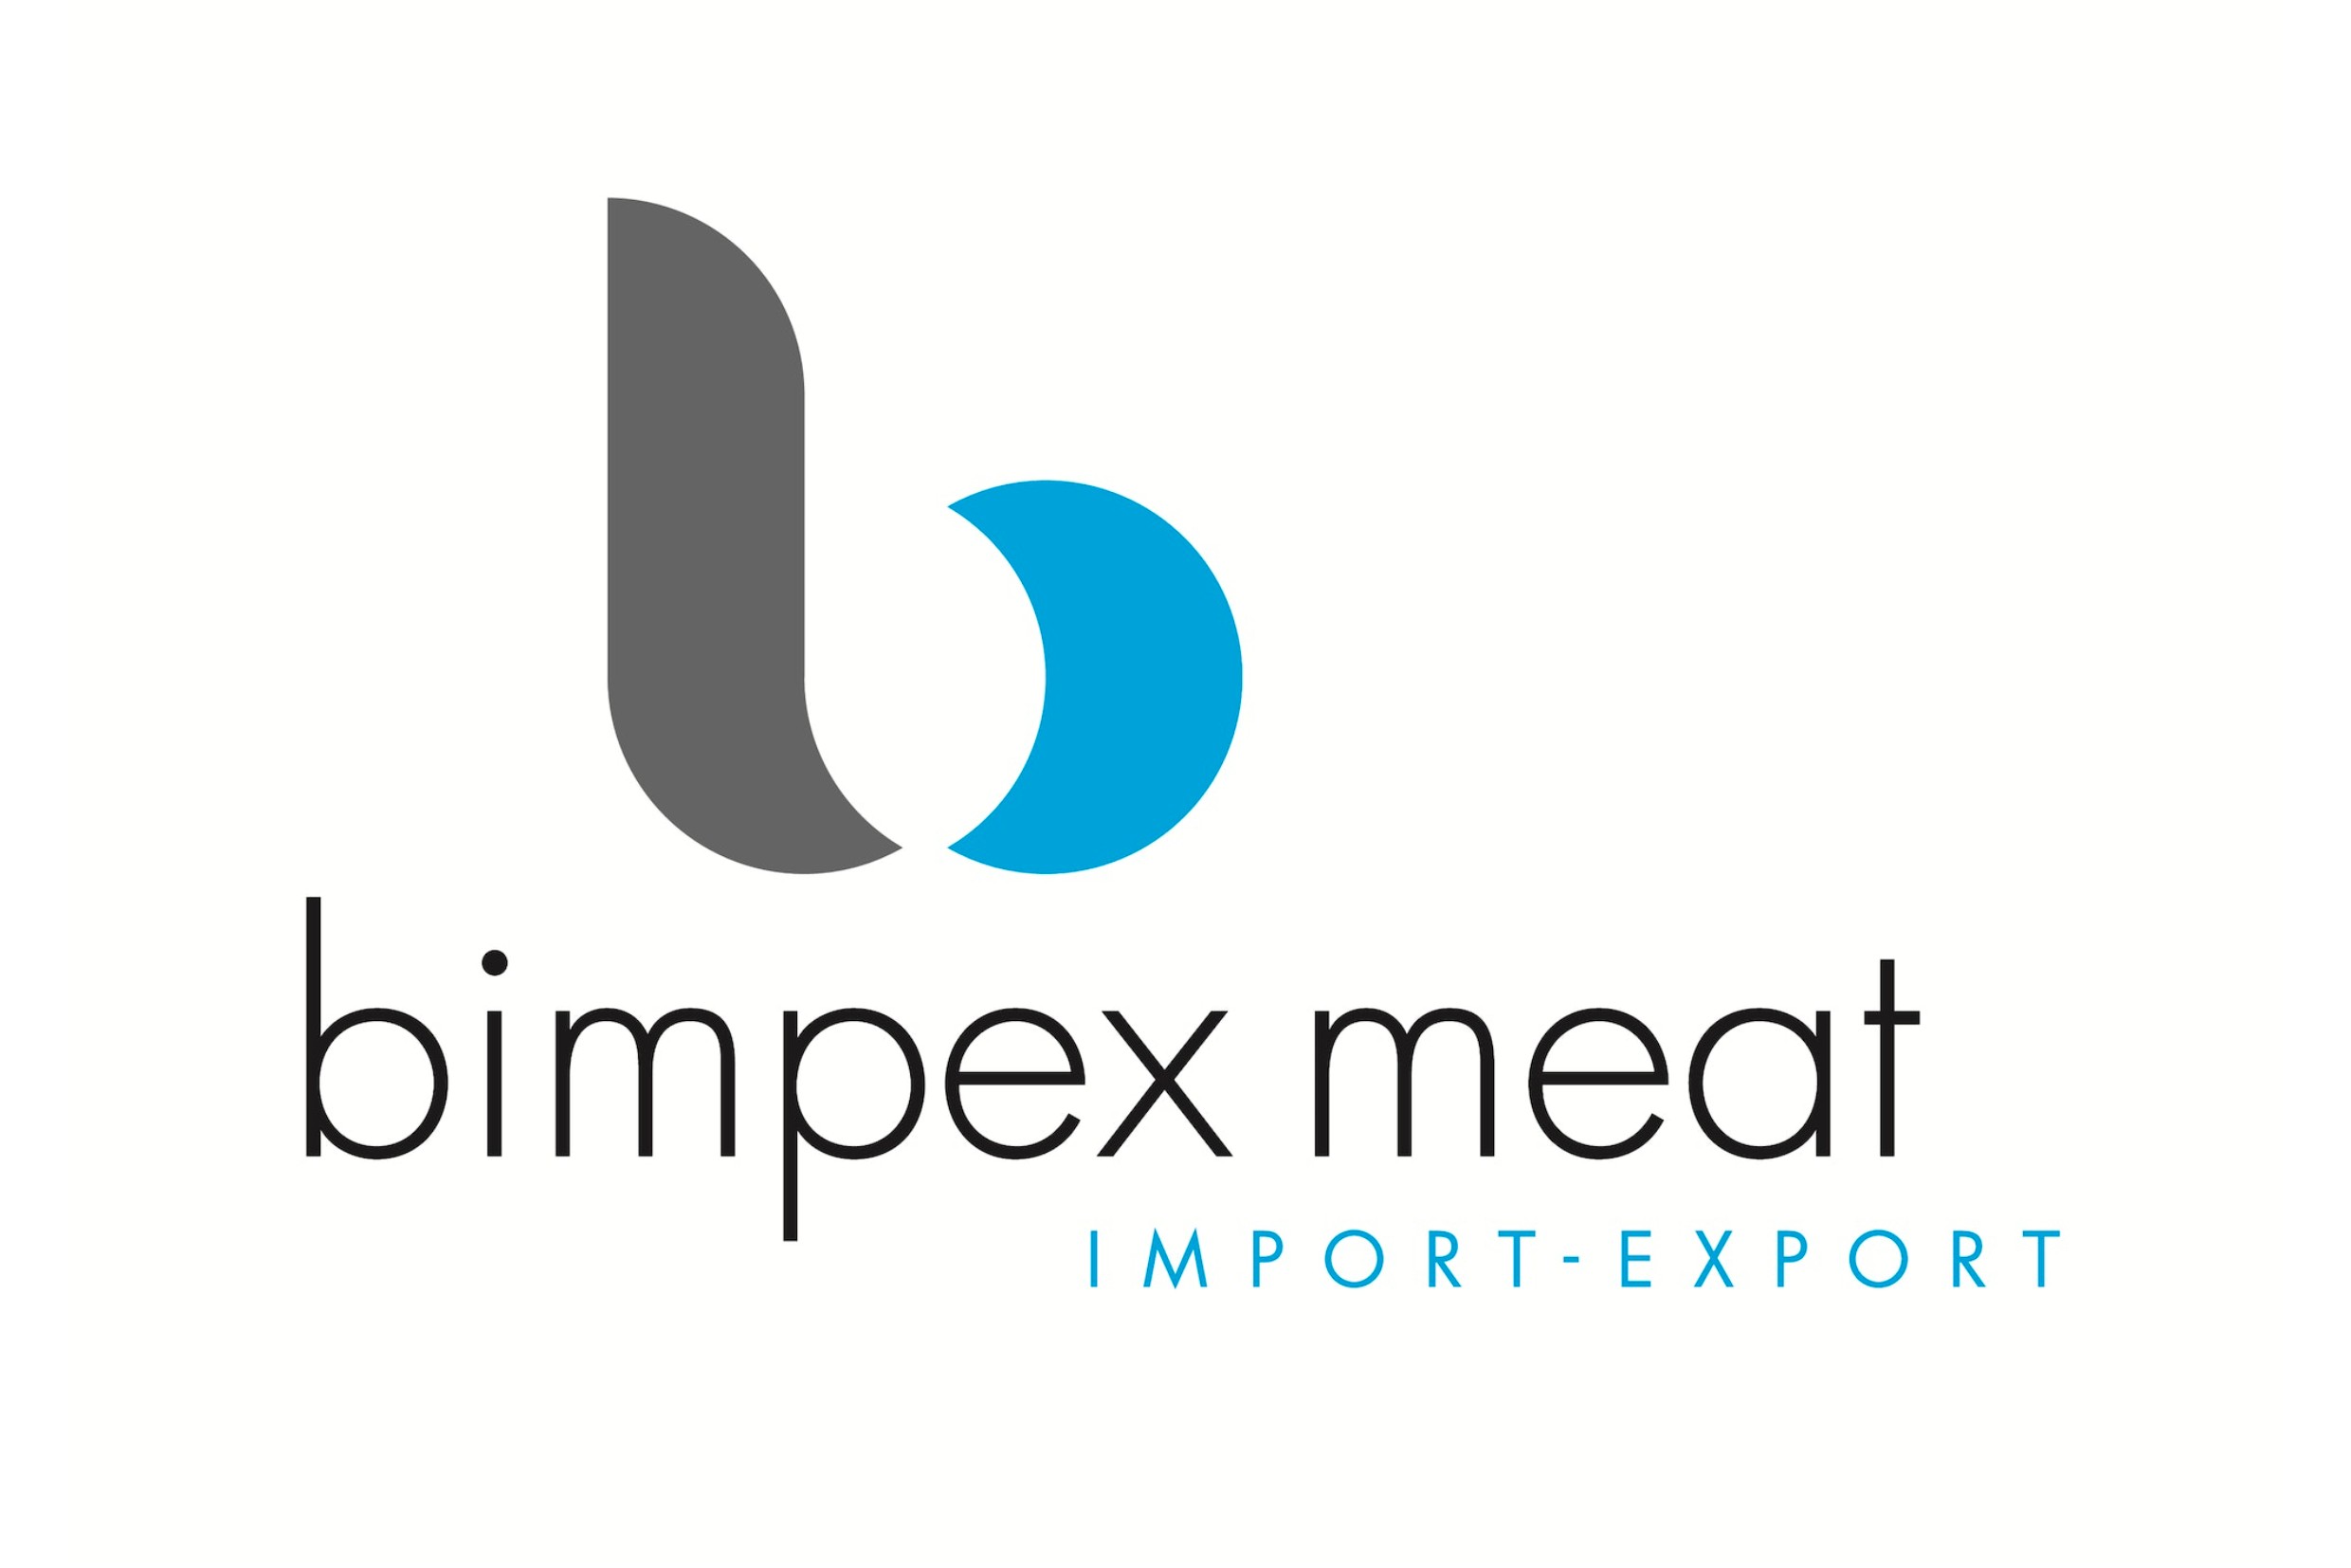 bimpex meat import export wettels on fire ninove